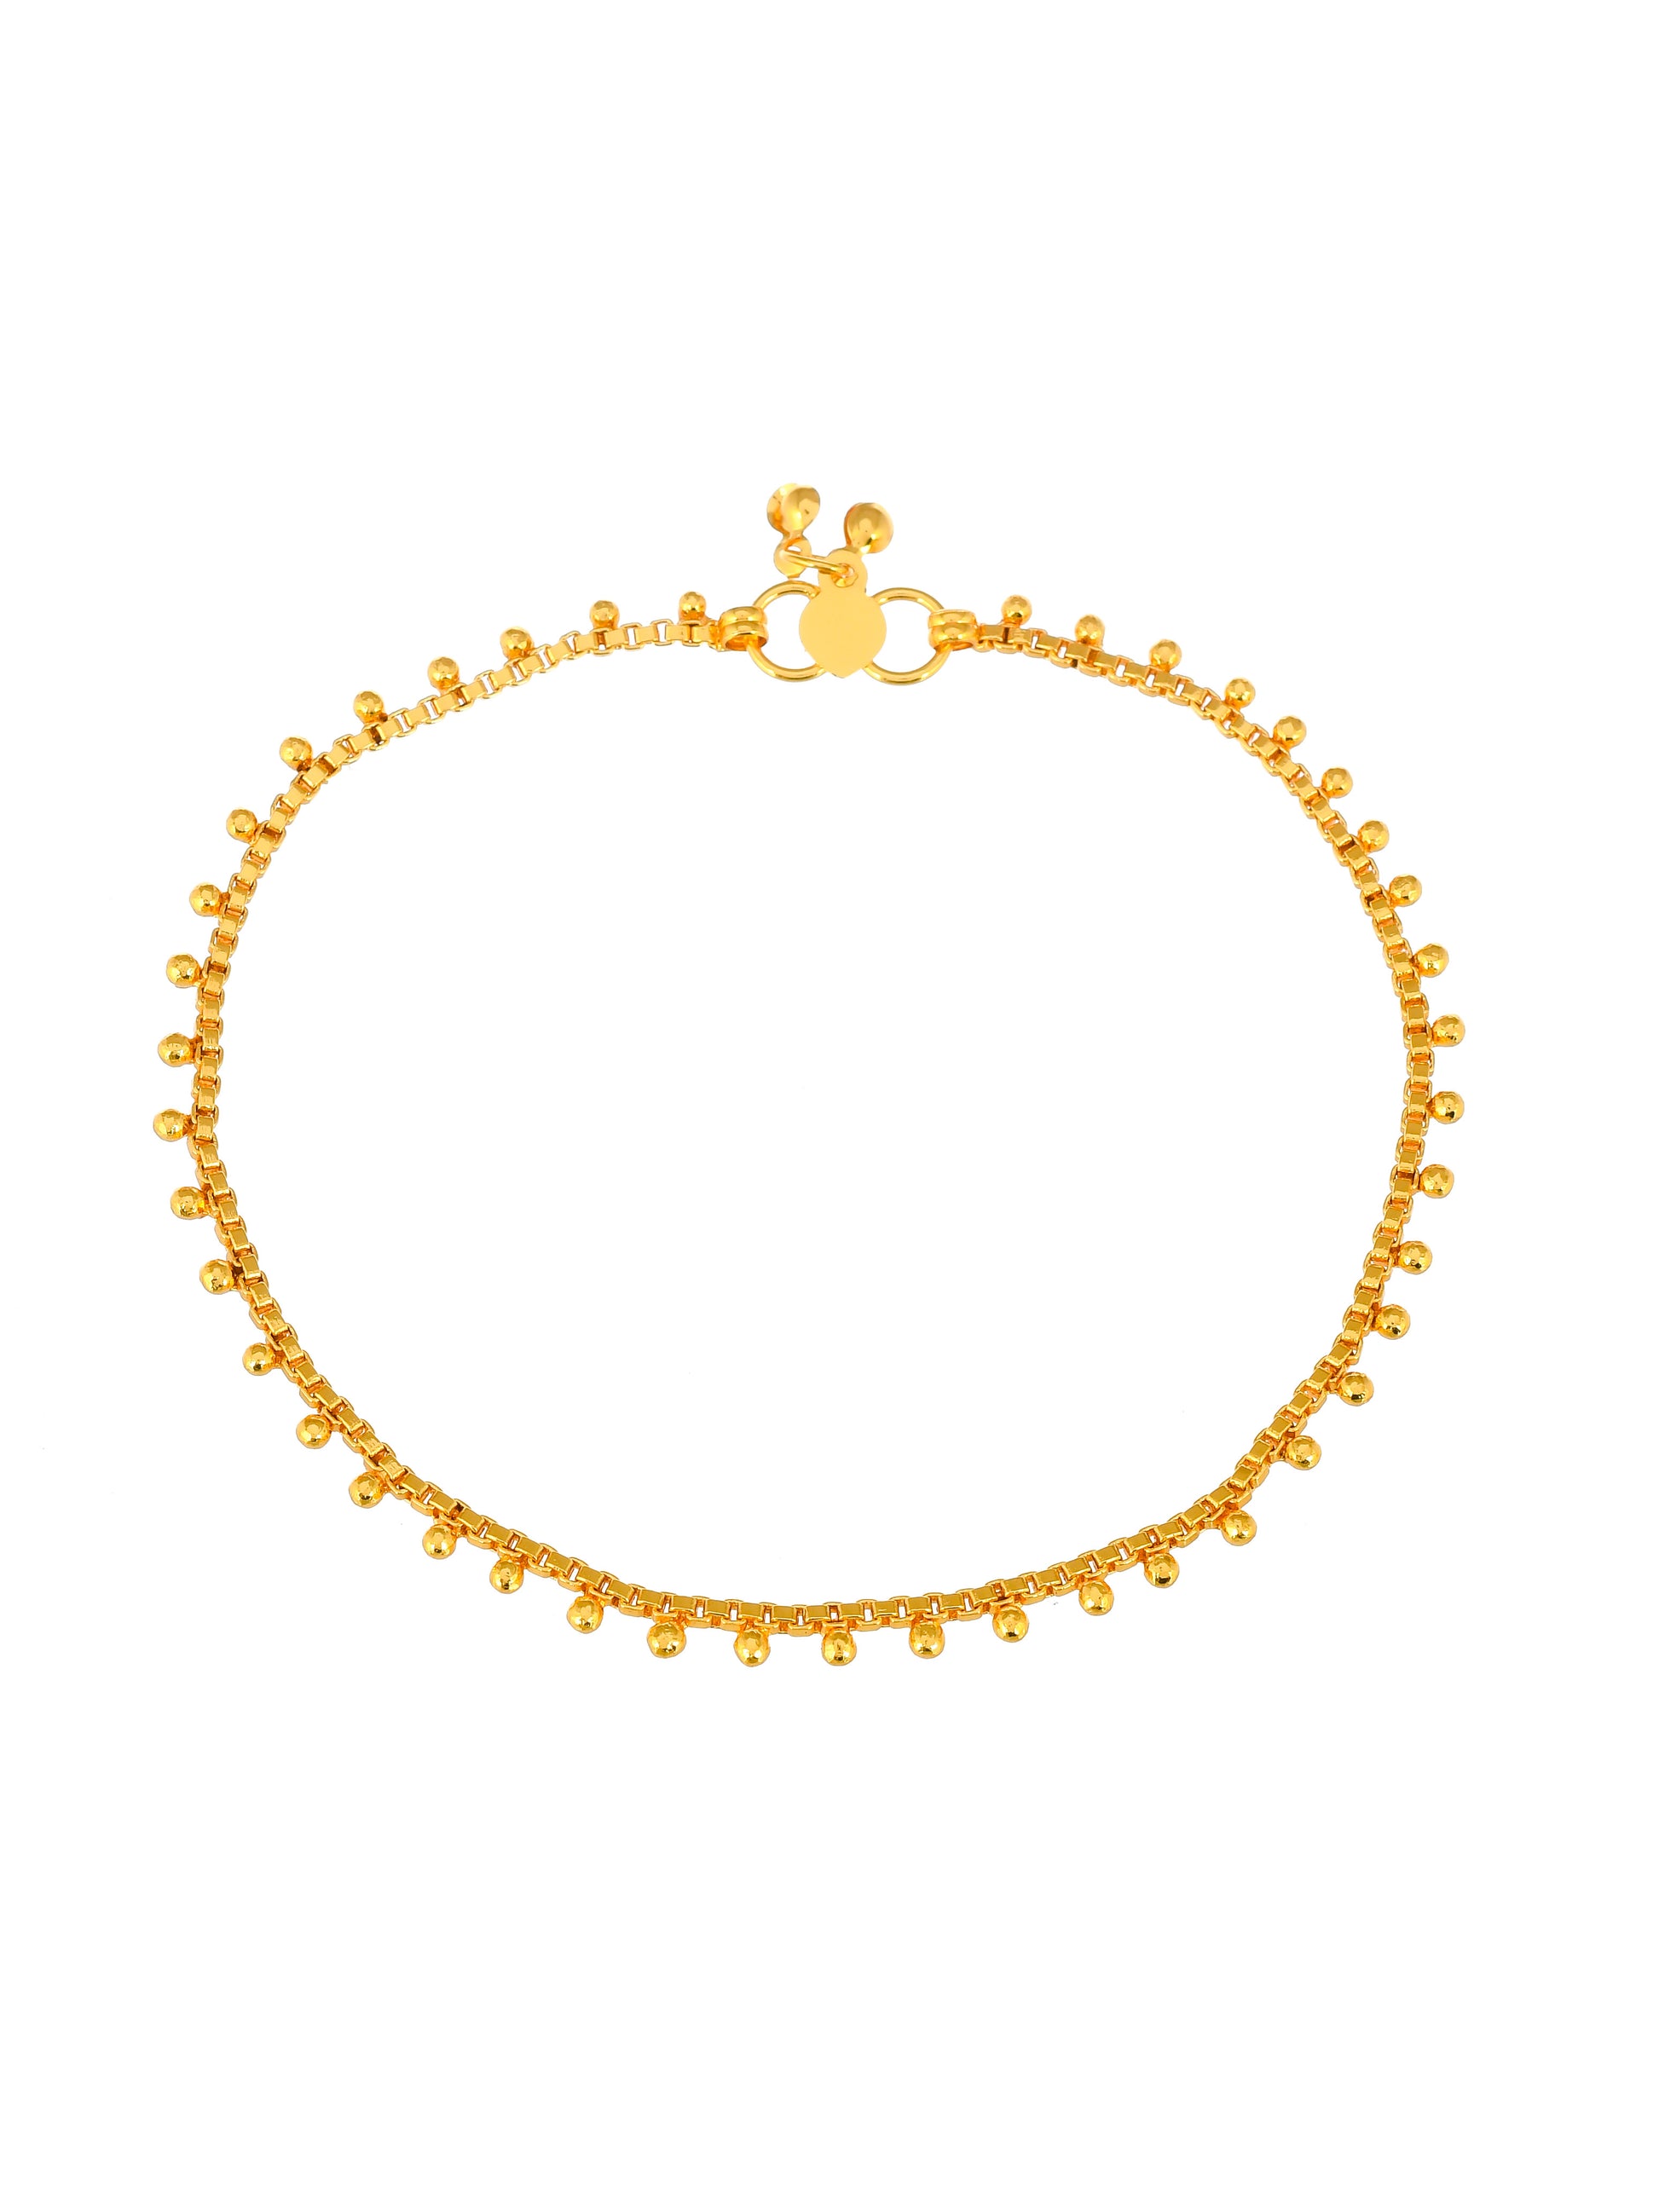 Gold Plated Handcrafted Floral Chain Anklet